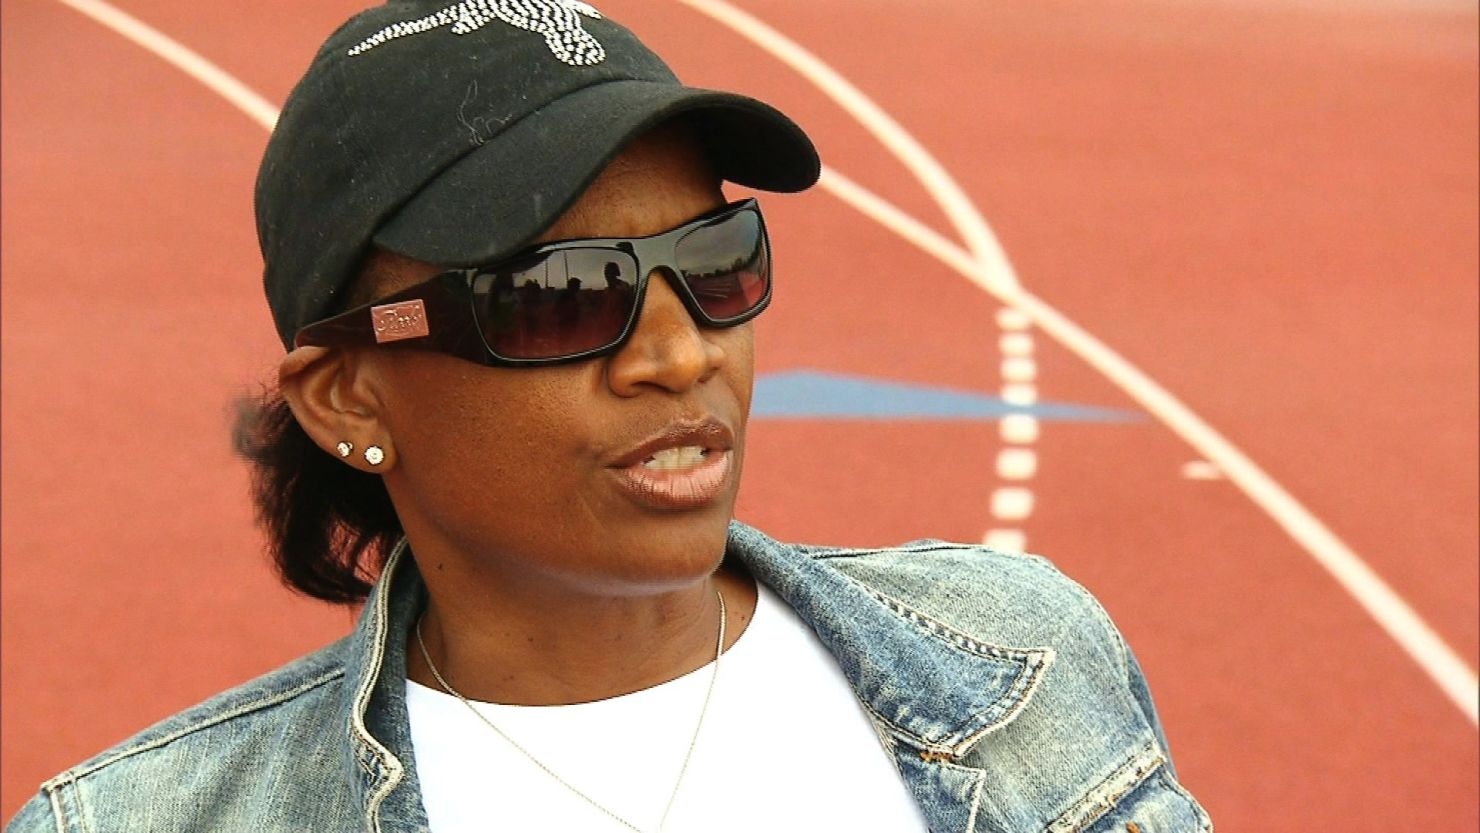 Bev Kearney was the first African-American coach to win an NCAA national team championship in Division I track and field.